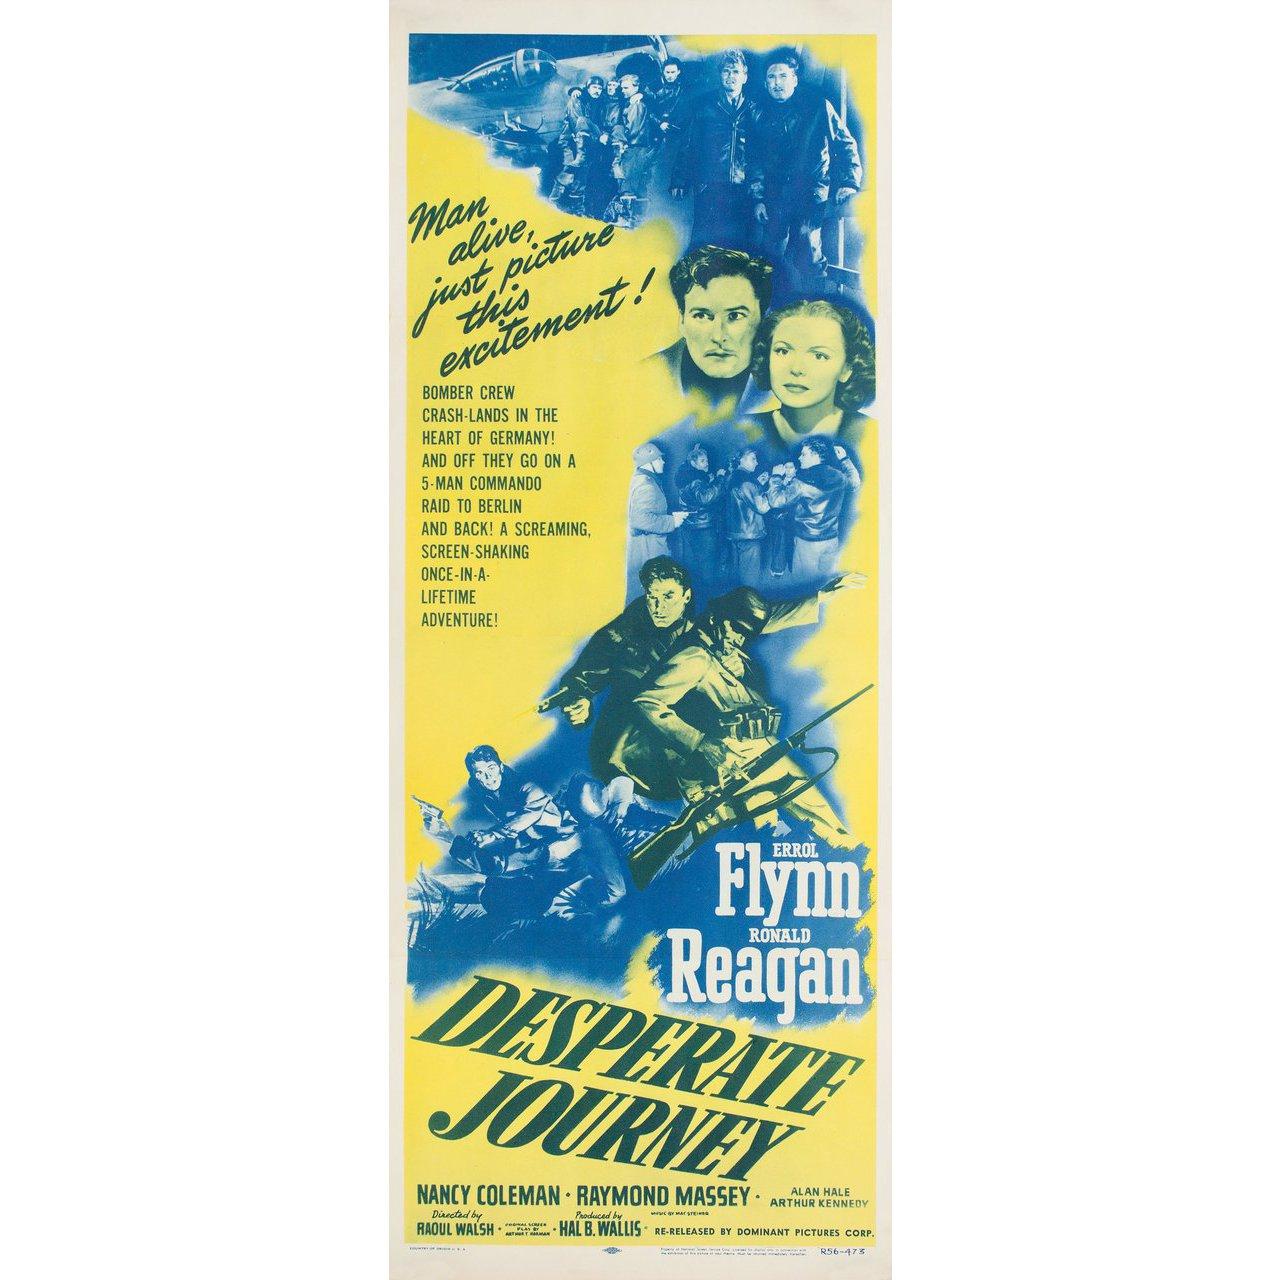 Original 1956 re-release U.S. insert poster for the 1942 film “Desperate Journey” directed by Raoul Walsh with Errol Flynn / Ronald Reagan / Nancy Coleman / Raymond Massey. Very good-fine condition, folded. Many original posters were issued folded